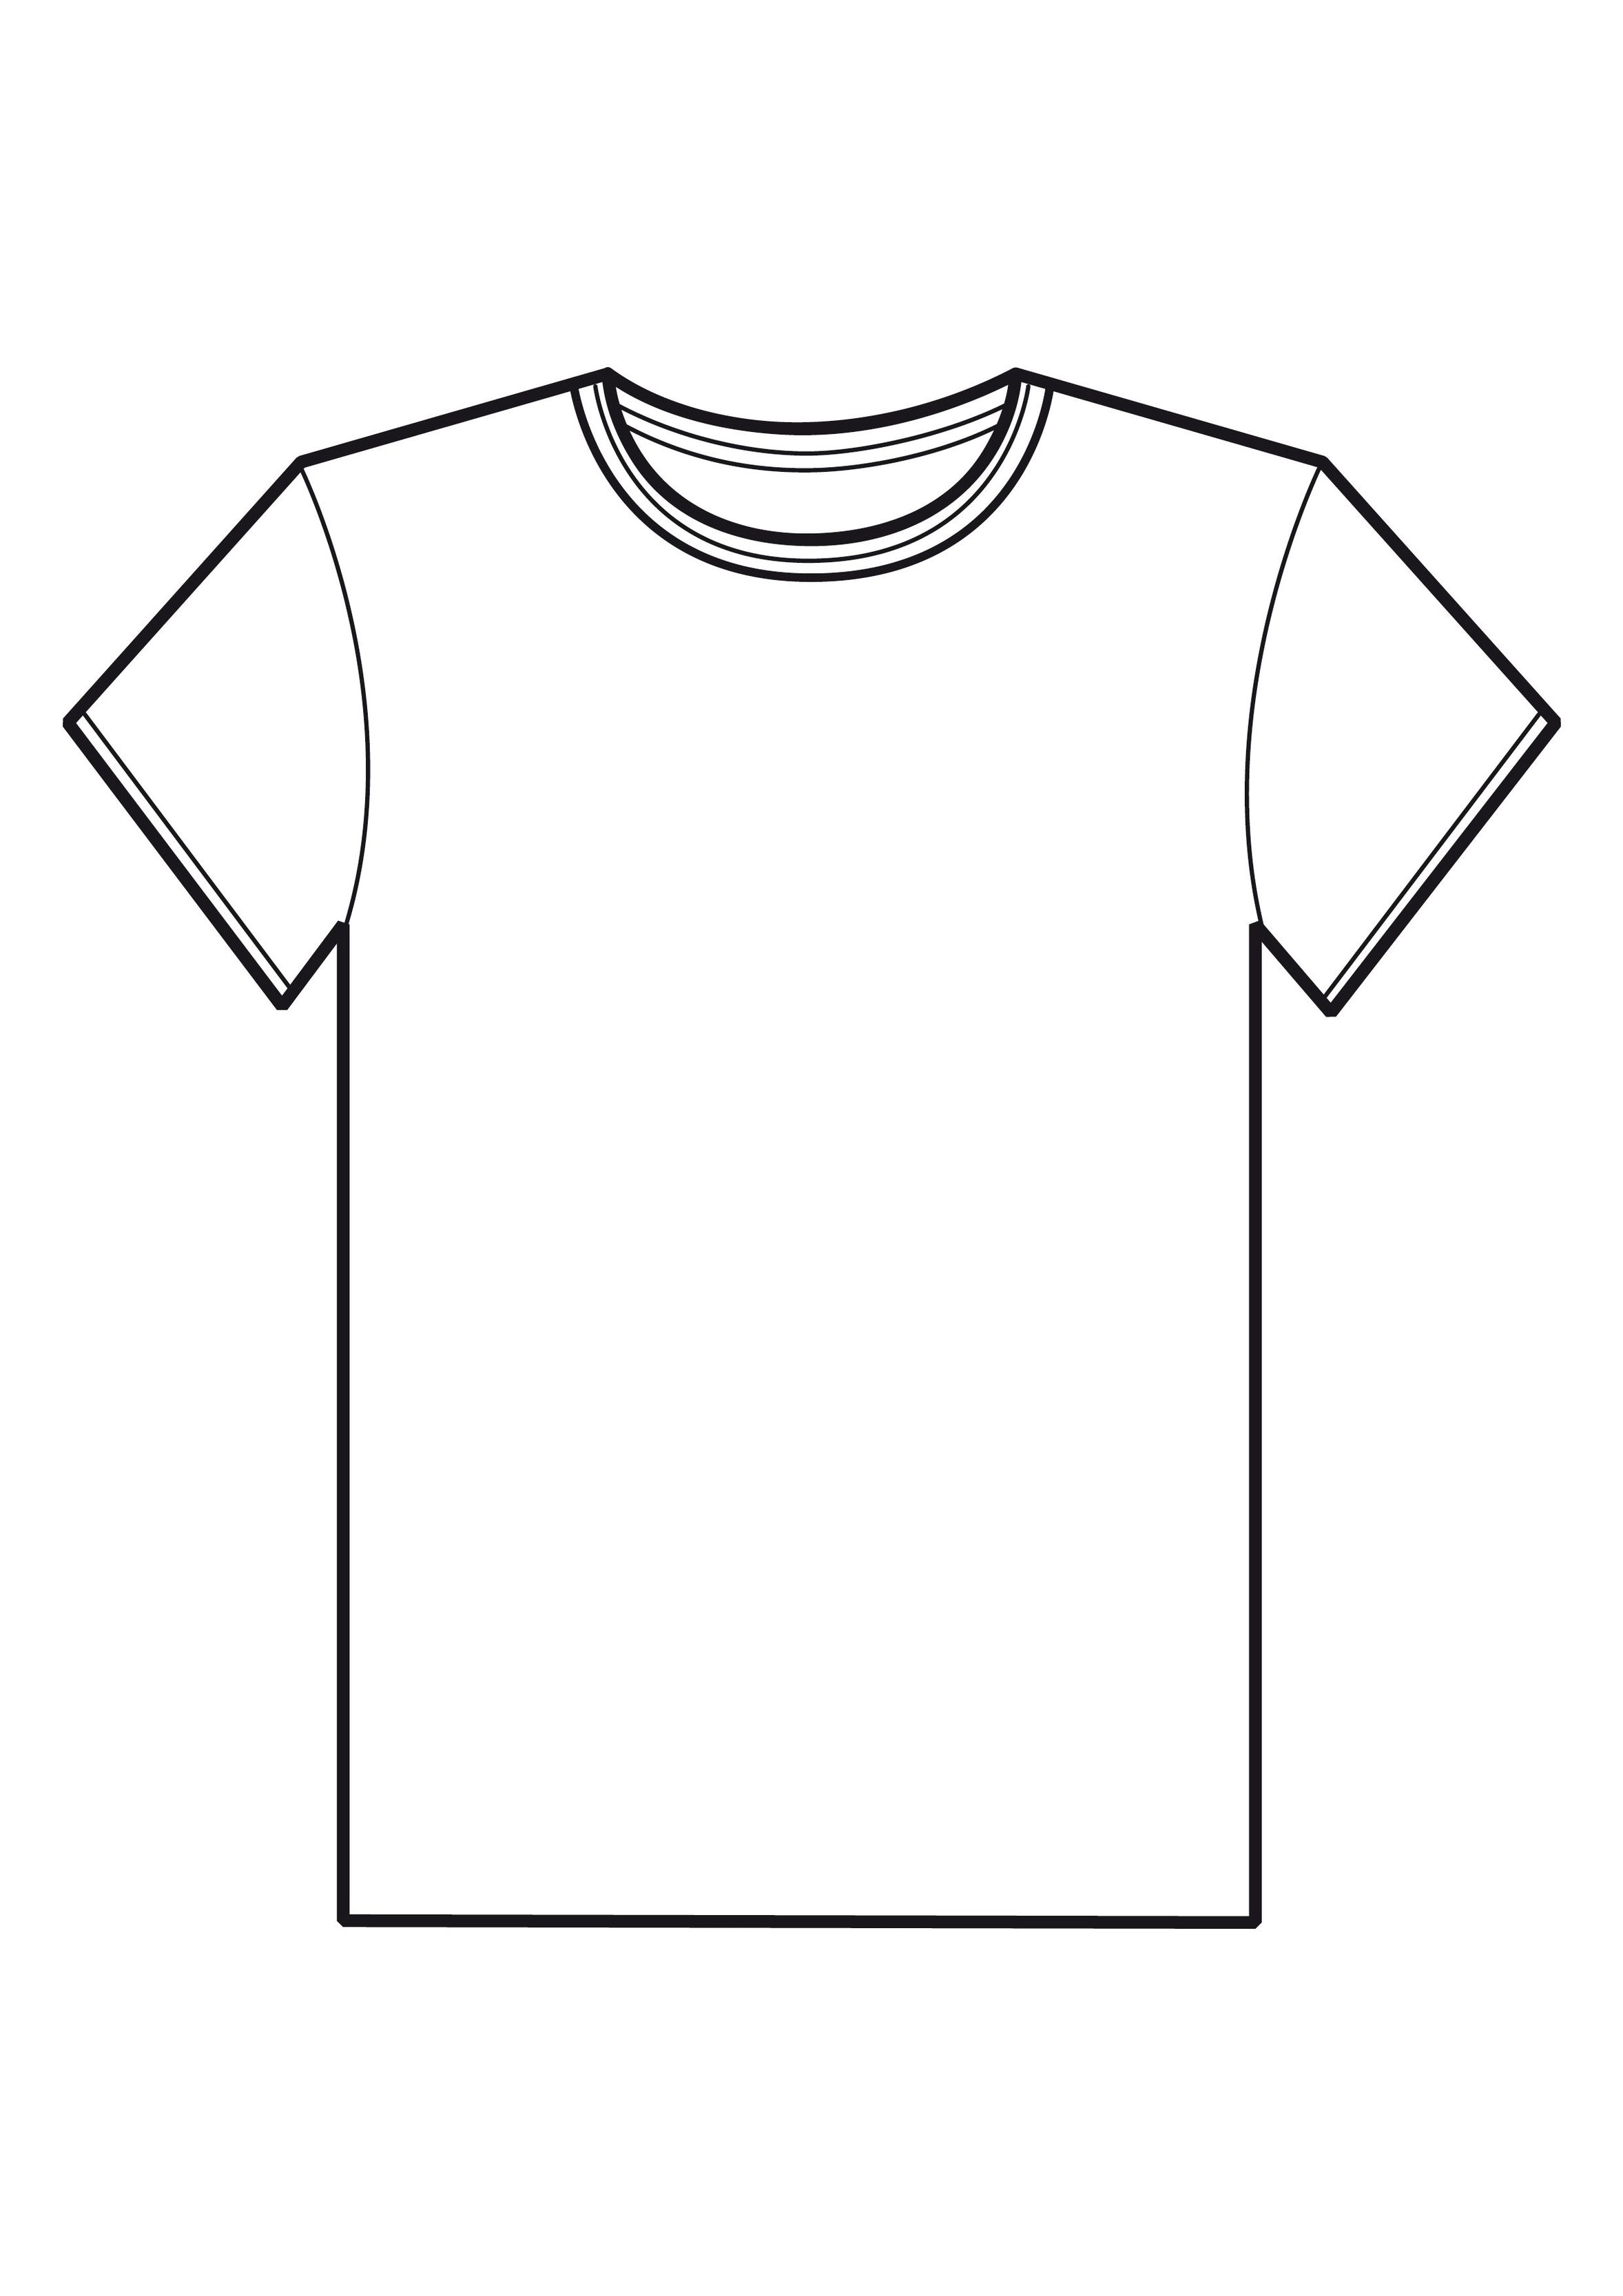 Tshirt picture of a white shirt clipart free to use clip